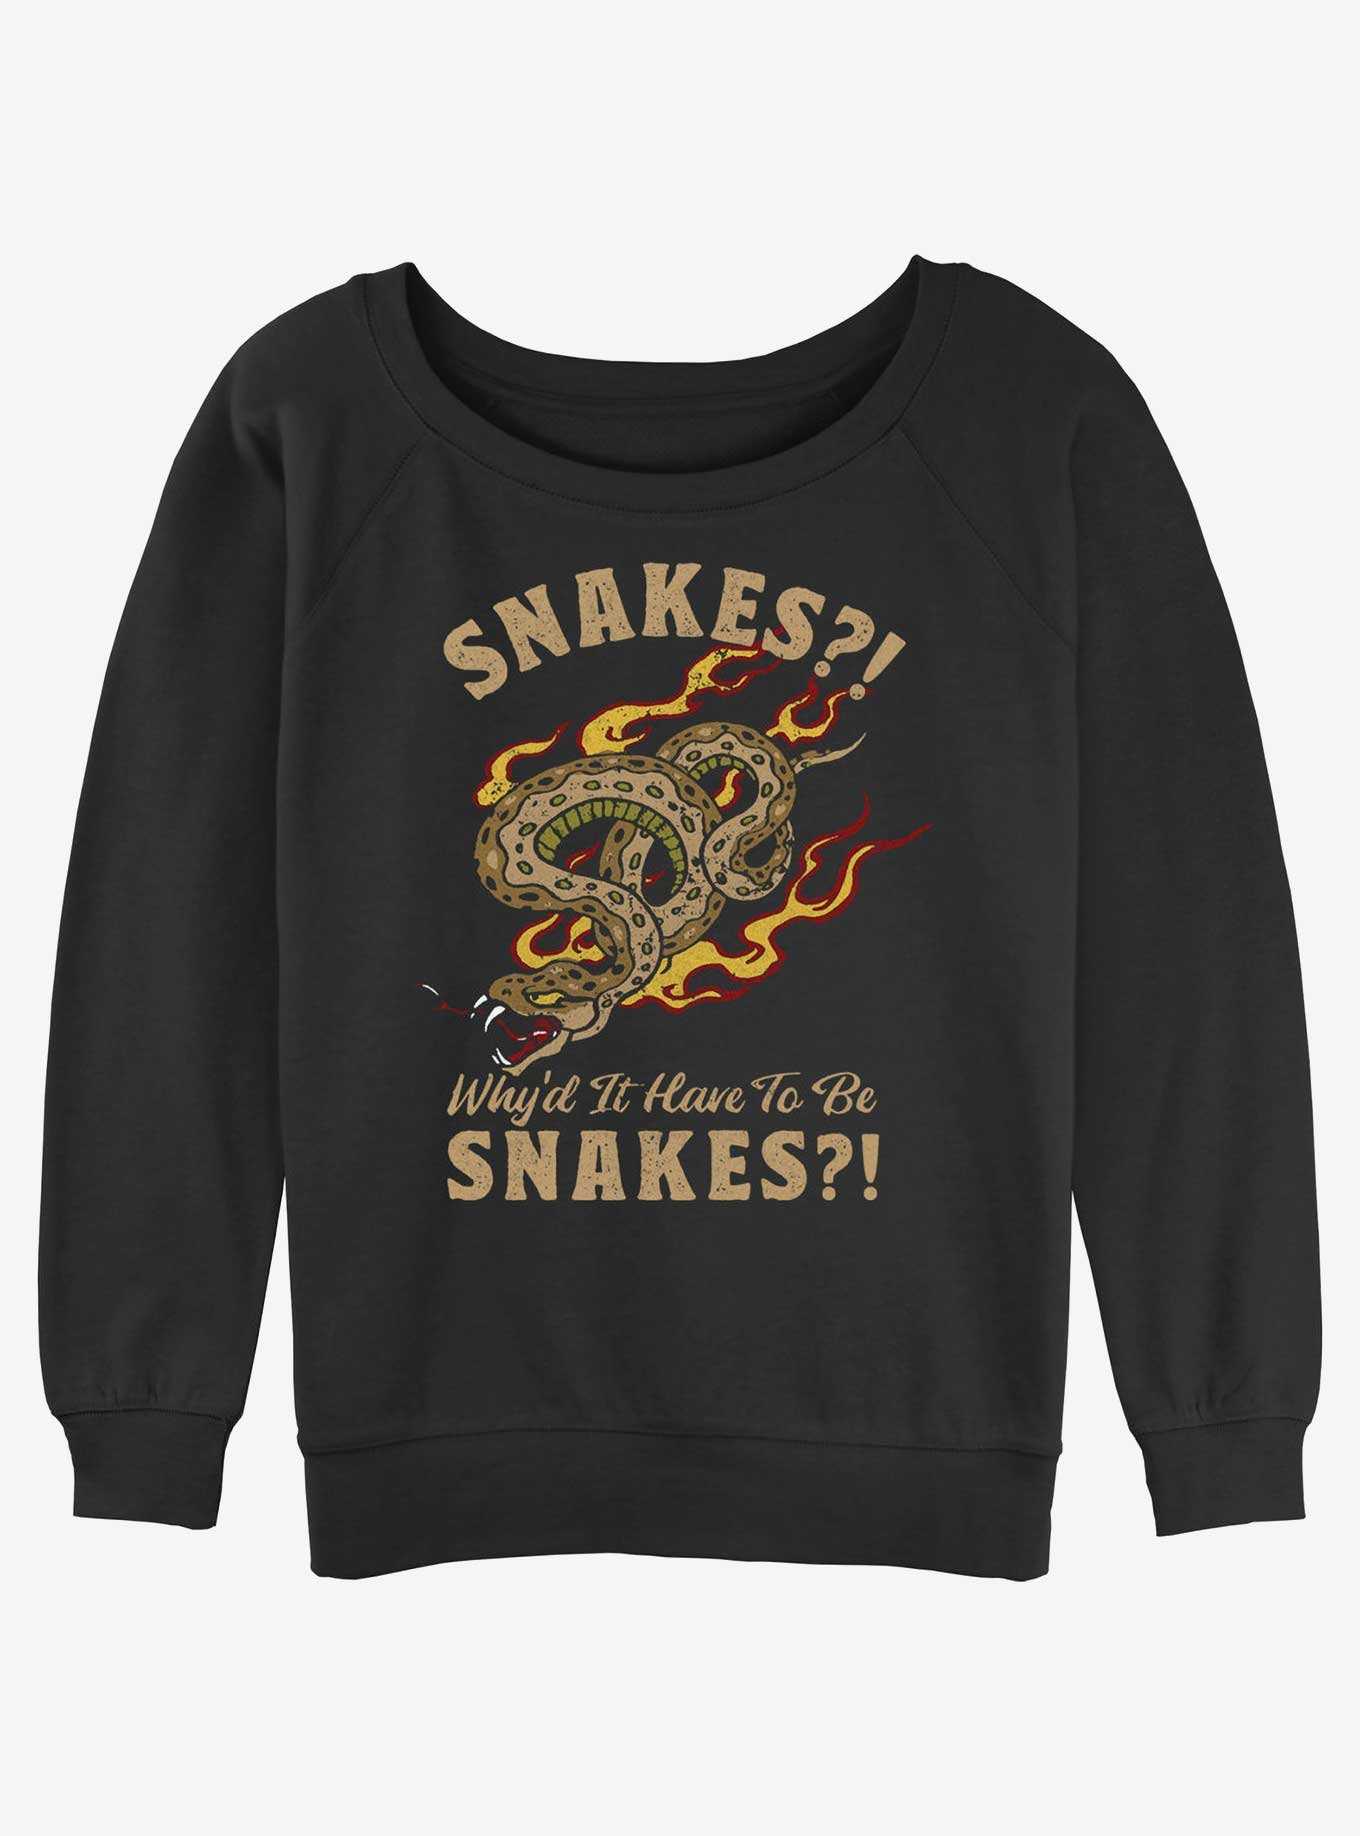 Indiana Jones Why'd It Have To Be Snakes Girls Slouchy Sweatshirt, , hi-res